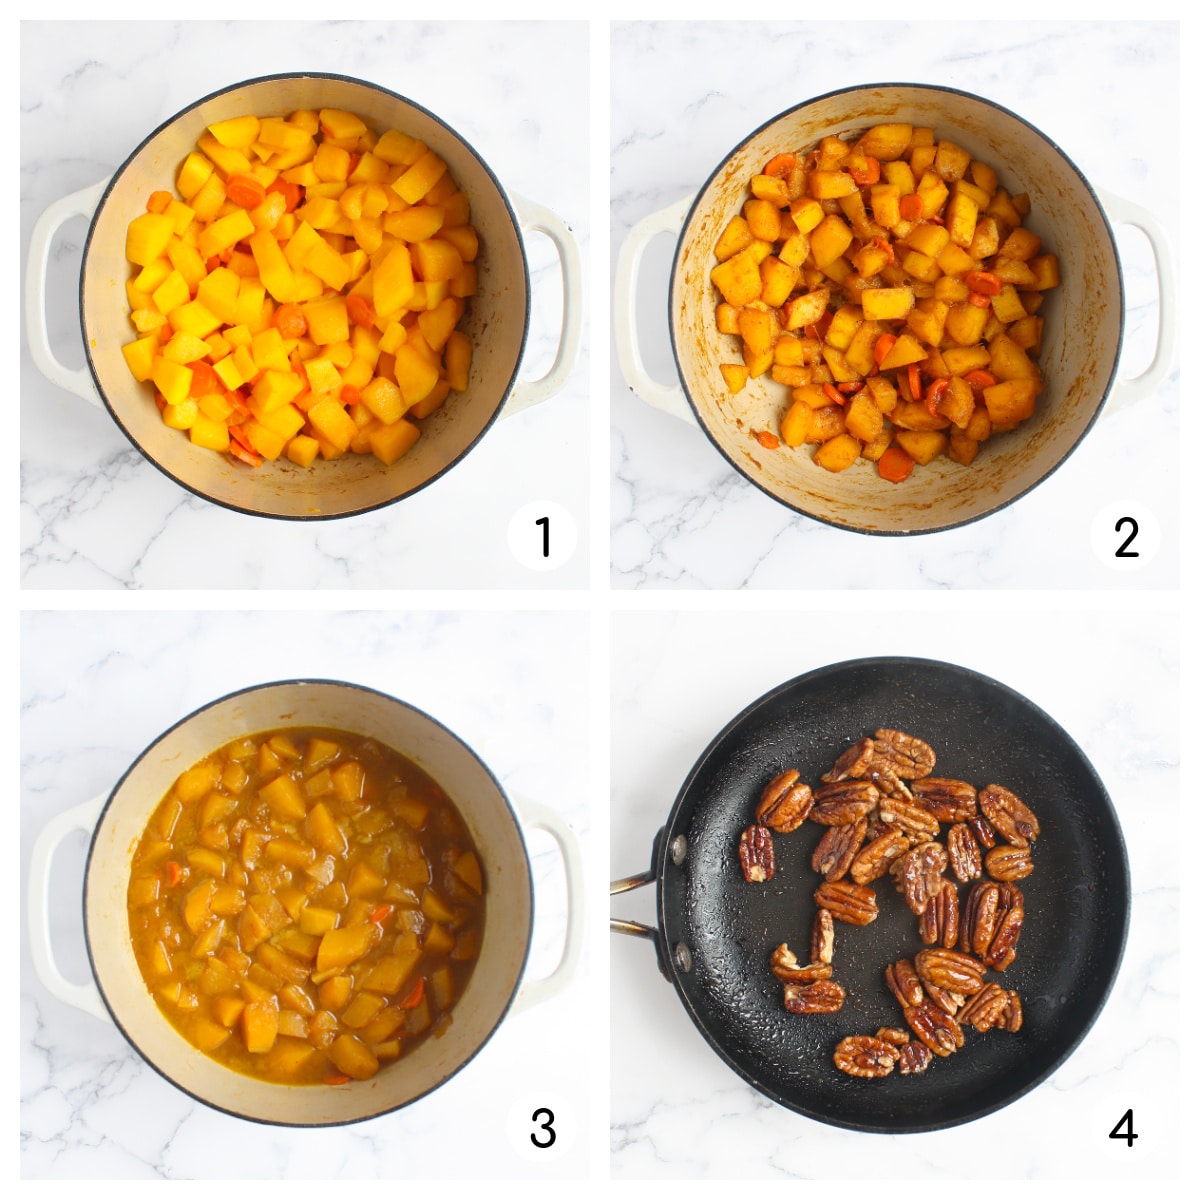 Process shots showing how to make butternut squash soup and maple glazed pecans.